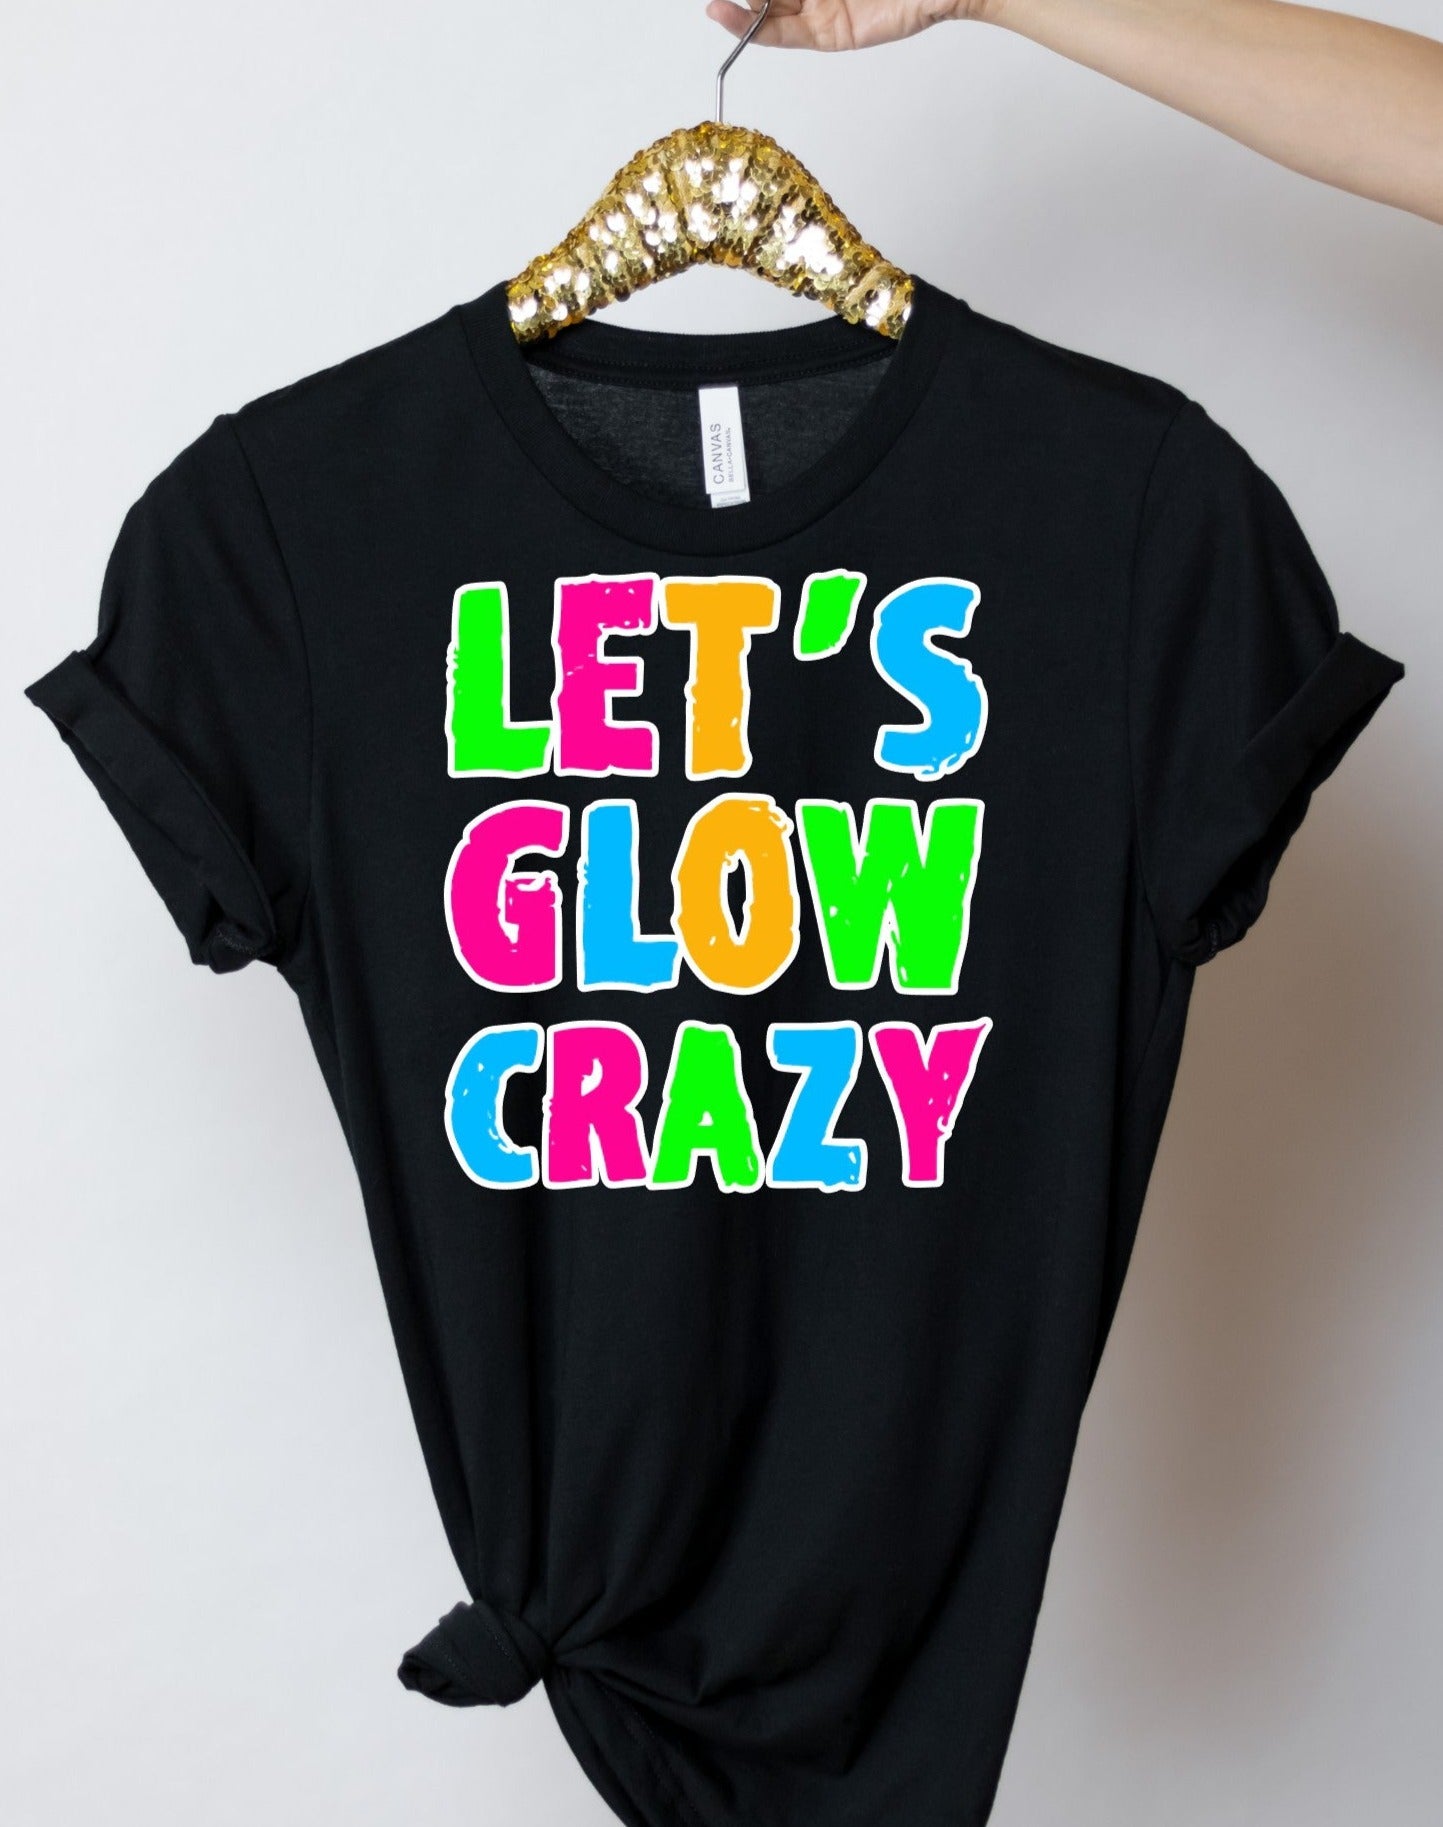 * Let's Glow Crazy Decal